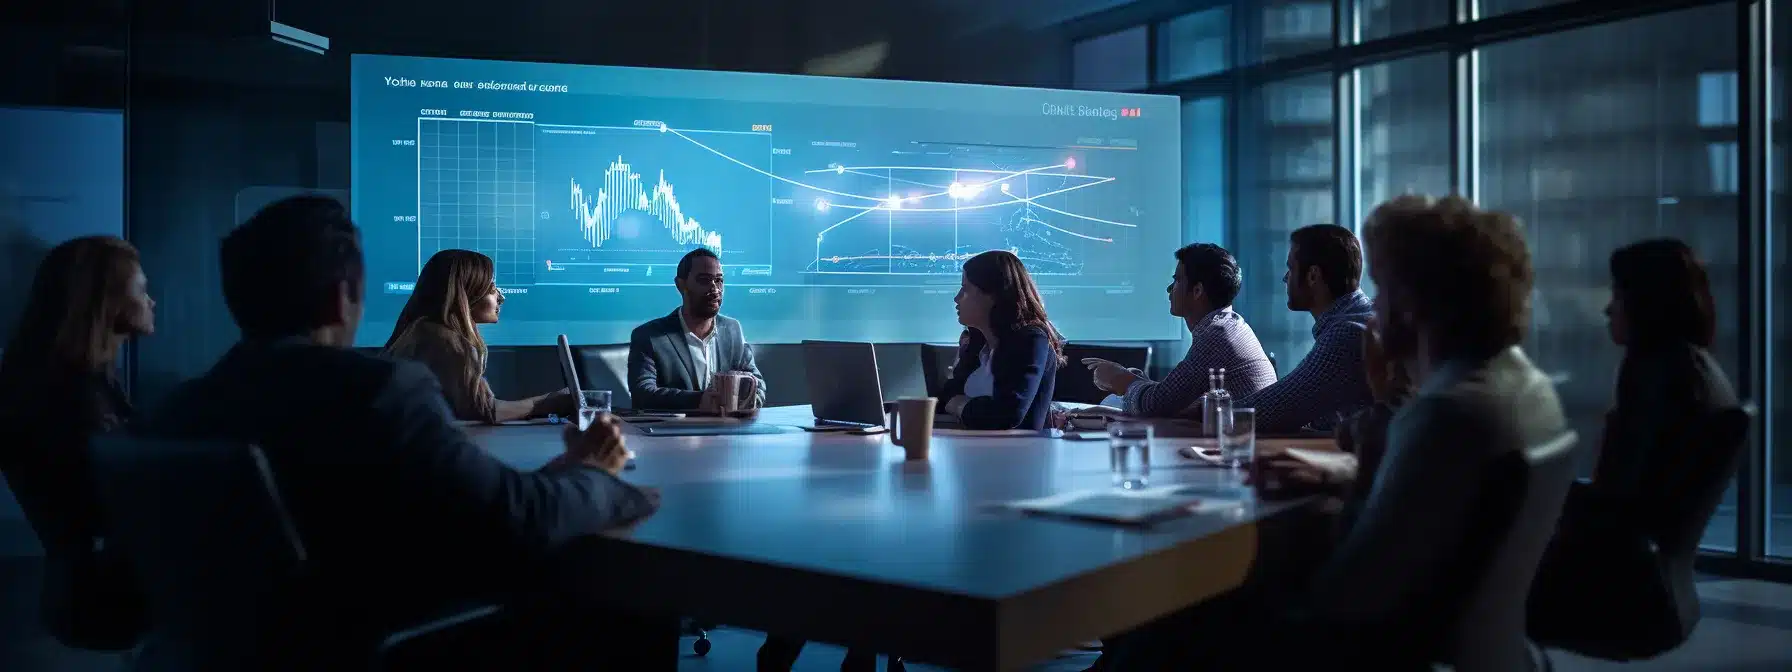 A Group Of Executives Discussing Strategies In A Boardroom, With A Projection Of The Company'S Logo And Charts On A Screen Behind Them.